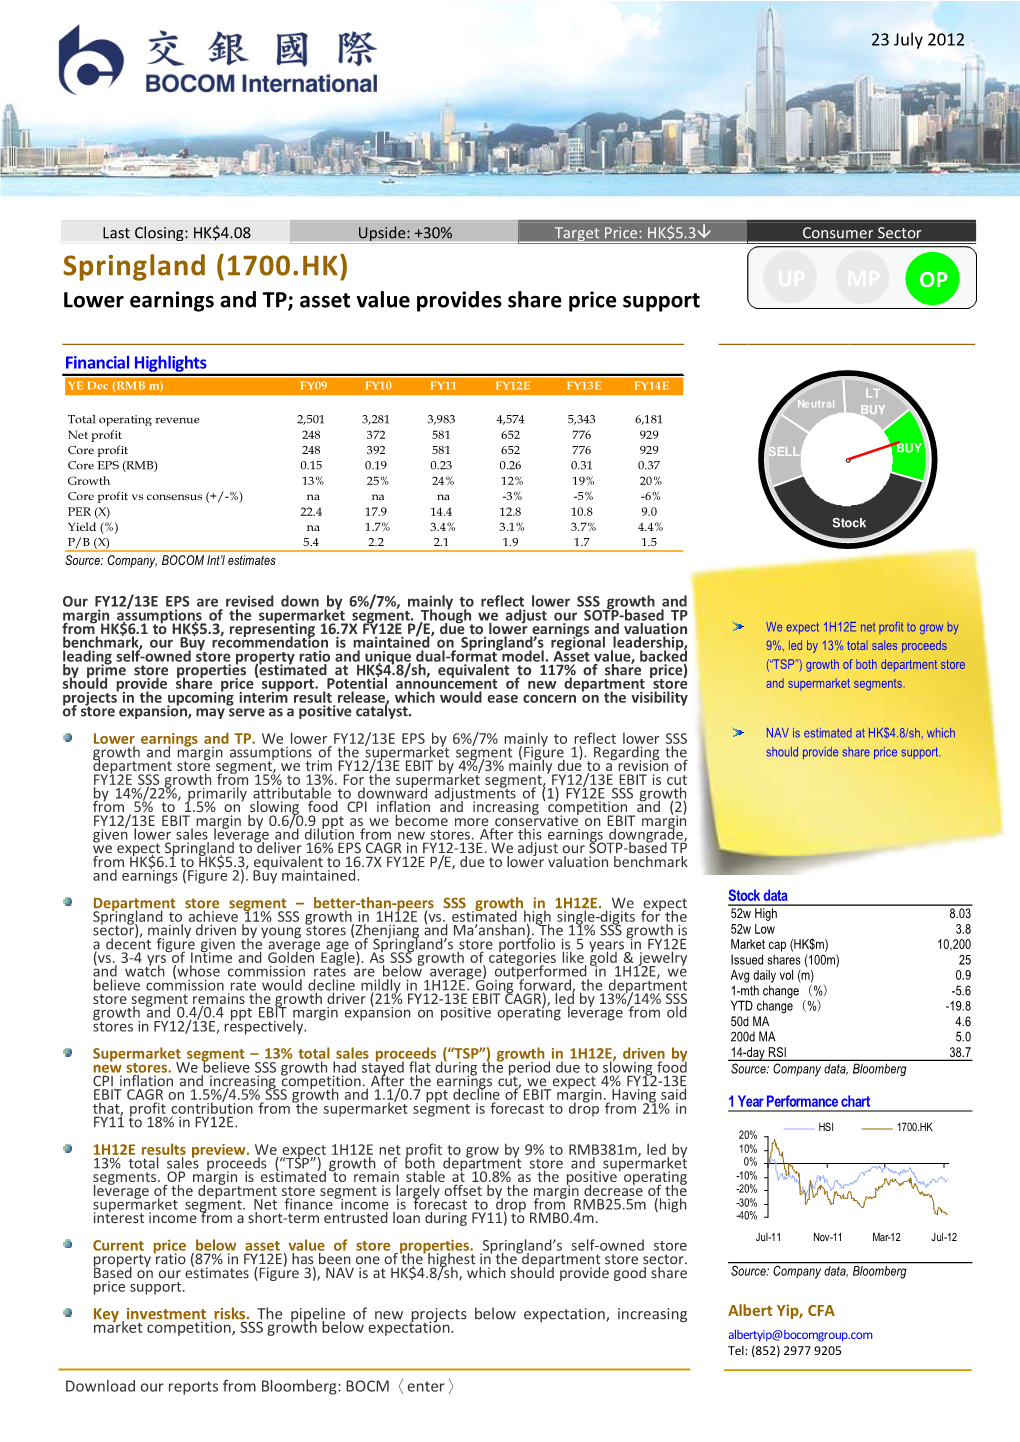 Springland (1700.HK) up MP OP Lower Earnings and TP; Asset Value Provides Share Price Support